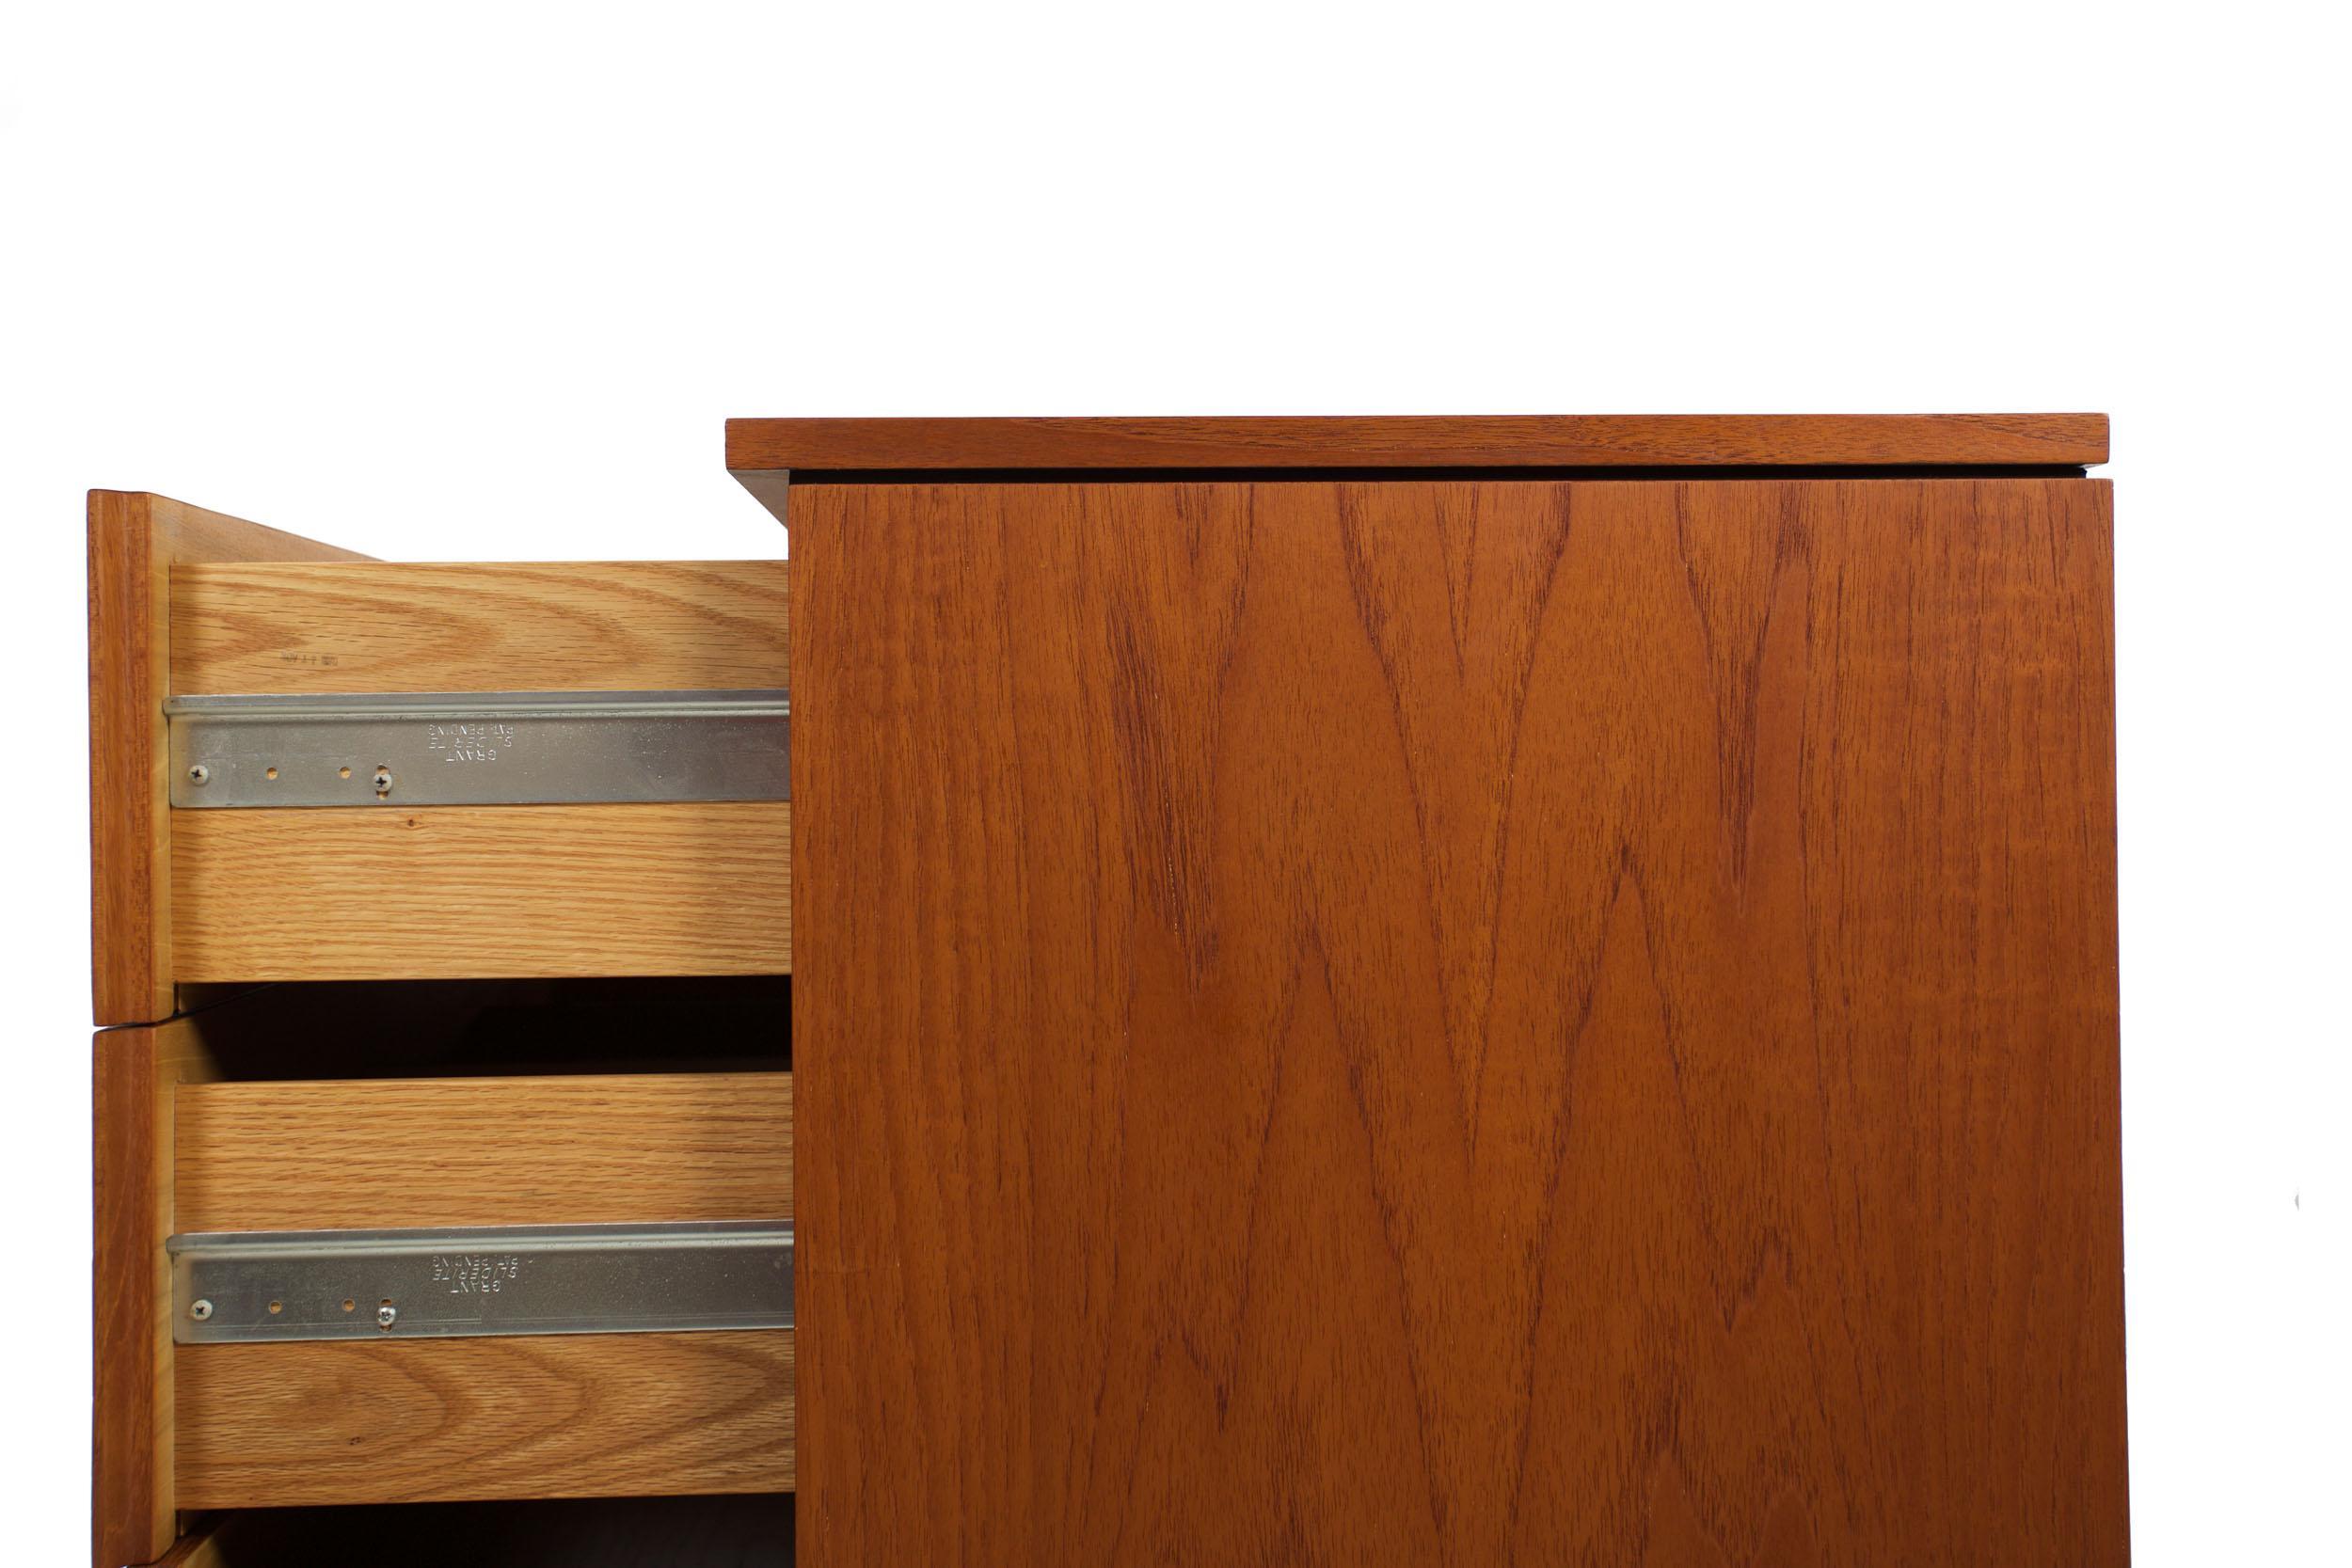 Knoll Mid-Century Modern Teak and Chrome Double Chest Credenza, circa 1970 For Sale 1